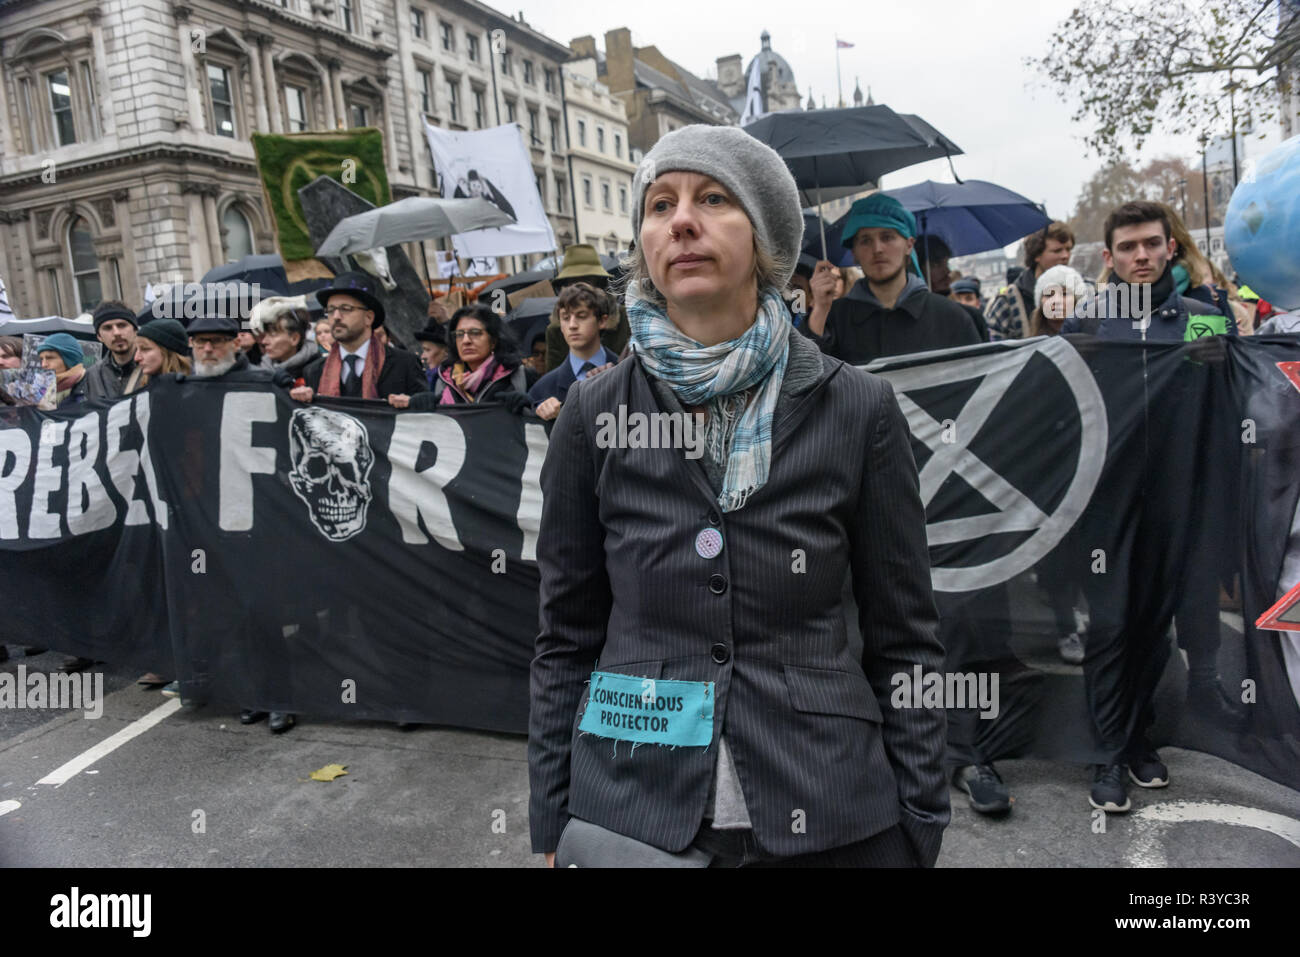 London, UK. 24th November 2018. After being prevented from burying their coffin Extinction Rebellion campaigners led by Gail Bradbrook walk up Whitehall in procession behind it, led by drummers and a trumpeter. They walked slowly up Whitehall and stop briefly to sit down in the road in silence when the coffin reached Downing St. When the procession moved on, others lay in the road to form the Extinction Rebellion Symbol for some minutes, before moving to join the rest on their way down The Mall to Buckingham Palace. emorial. Pet Stock Photo